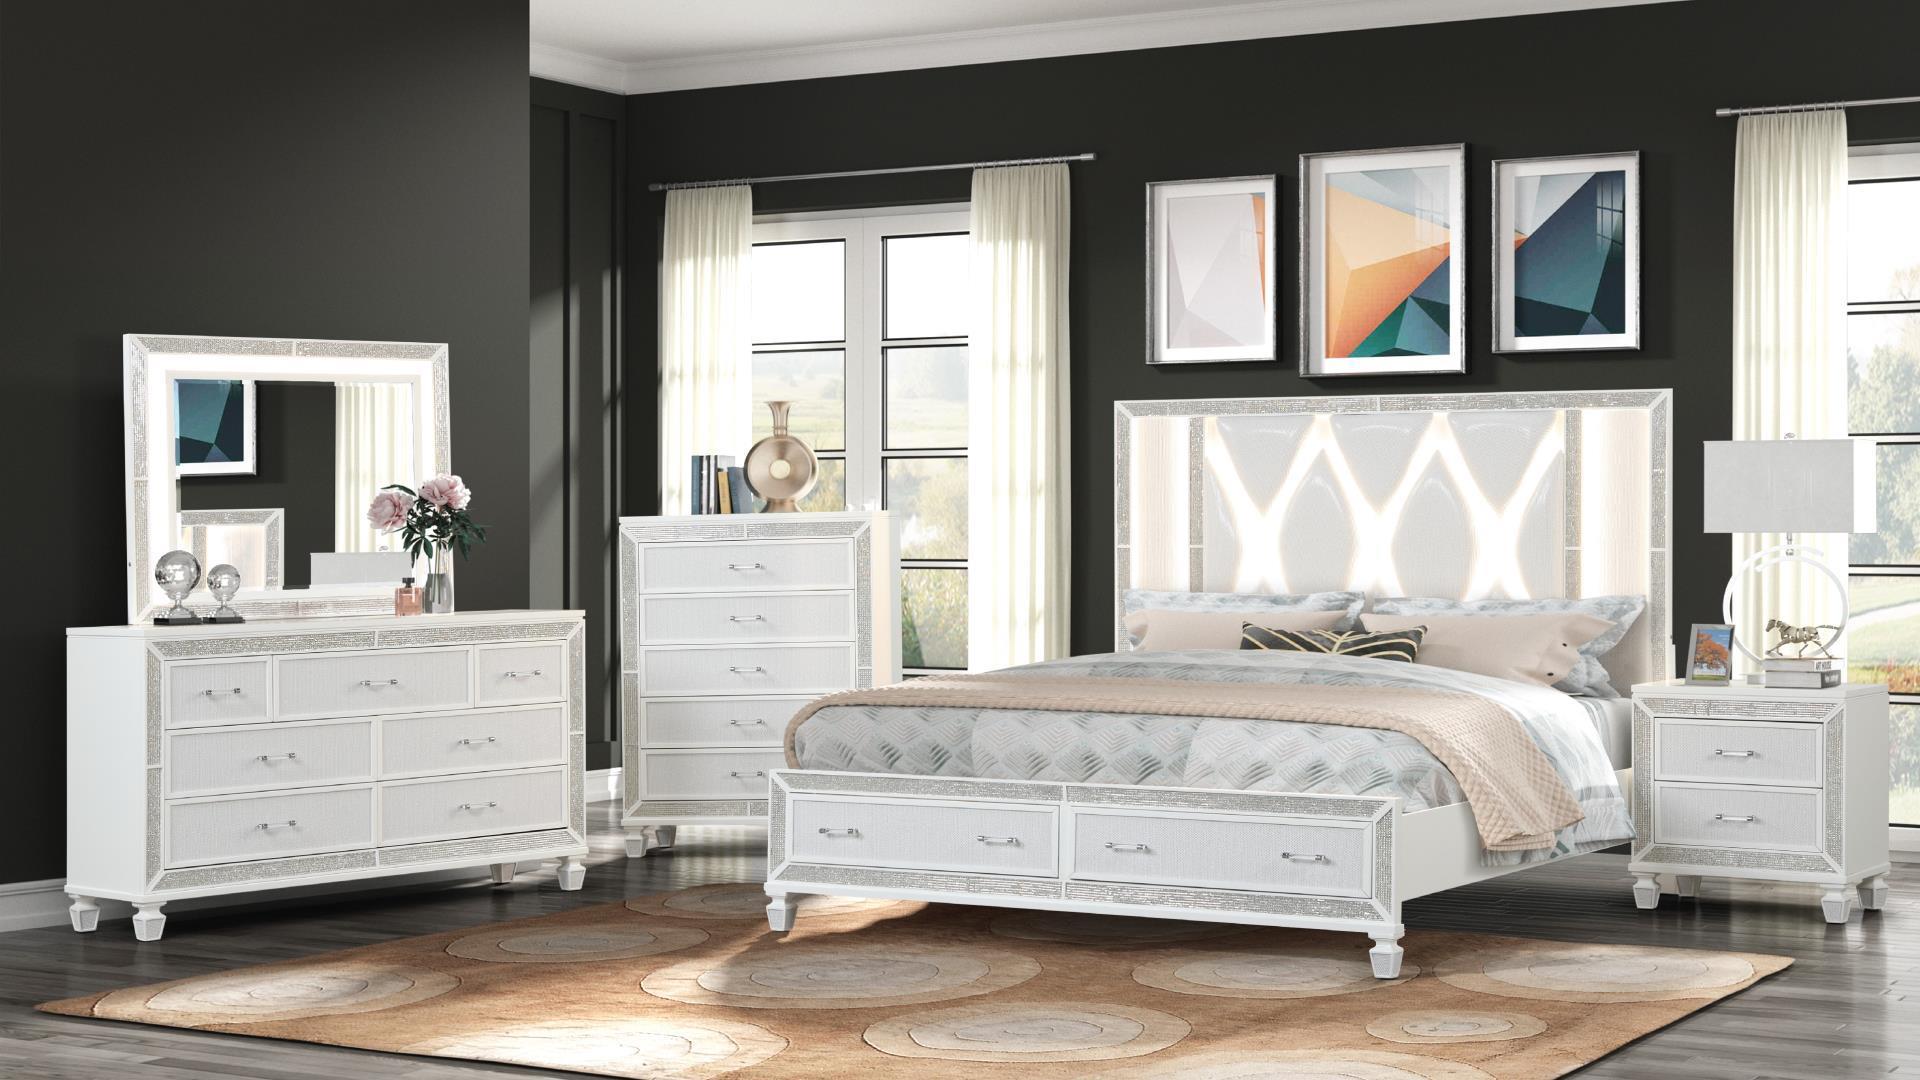 

    
CRYSTAL-Q-BED Galaxy Home Furniture Storage Bed
